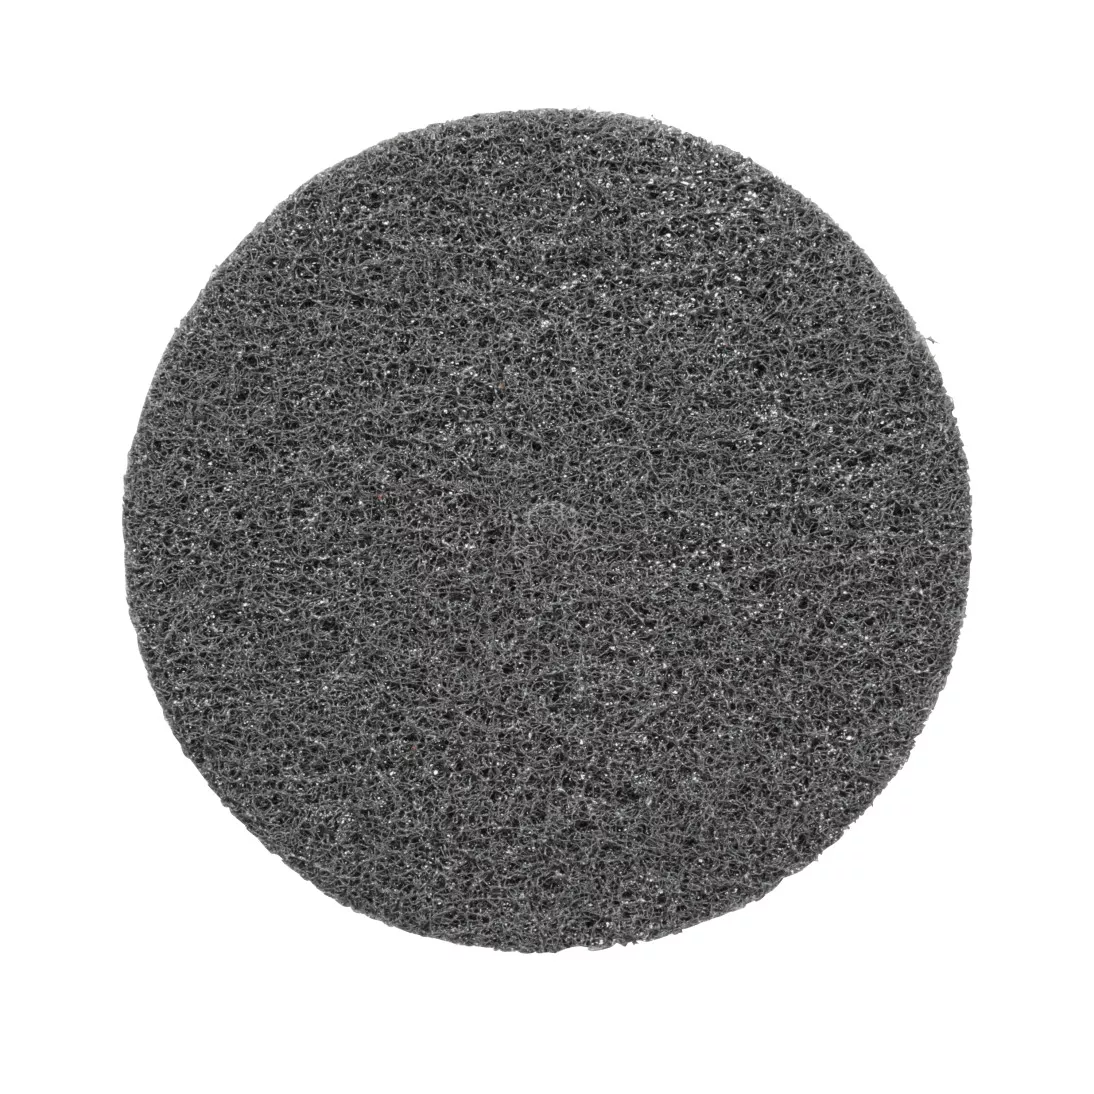 Standard Abrasives™ Buff and Blend Hook and Loop EP Disc, 820709, 6 in x
1/2 in A FIN, 10 per inner 100 per case